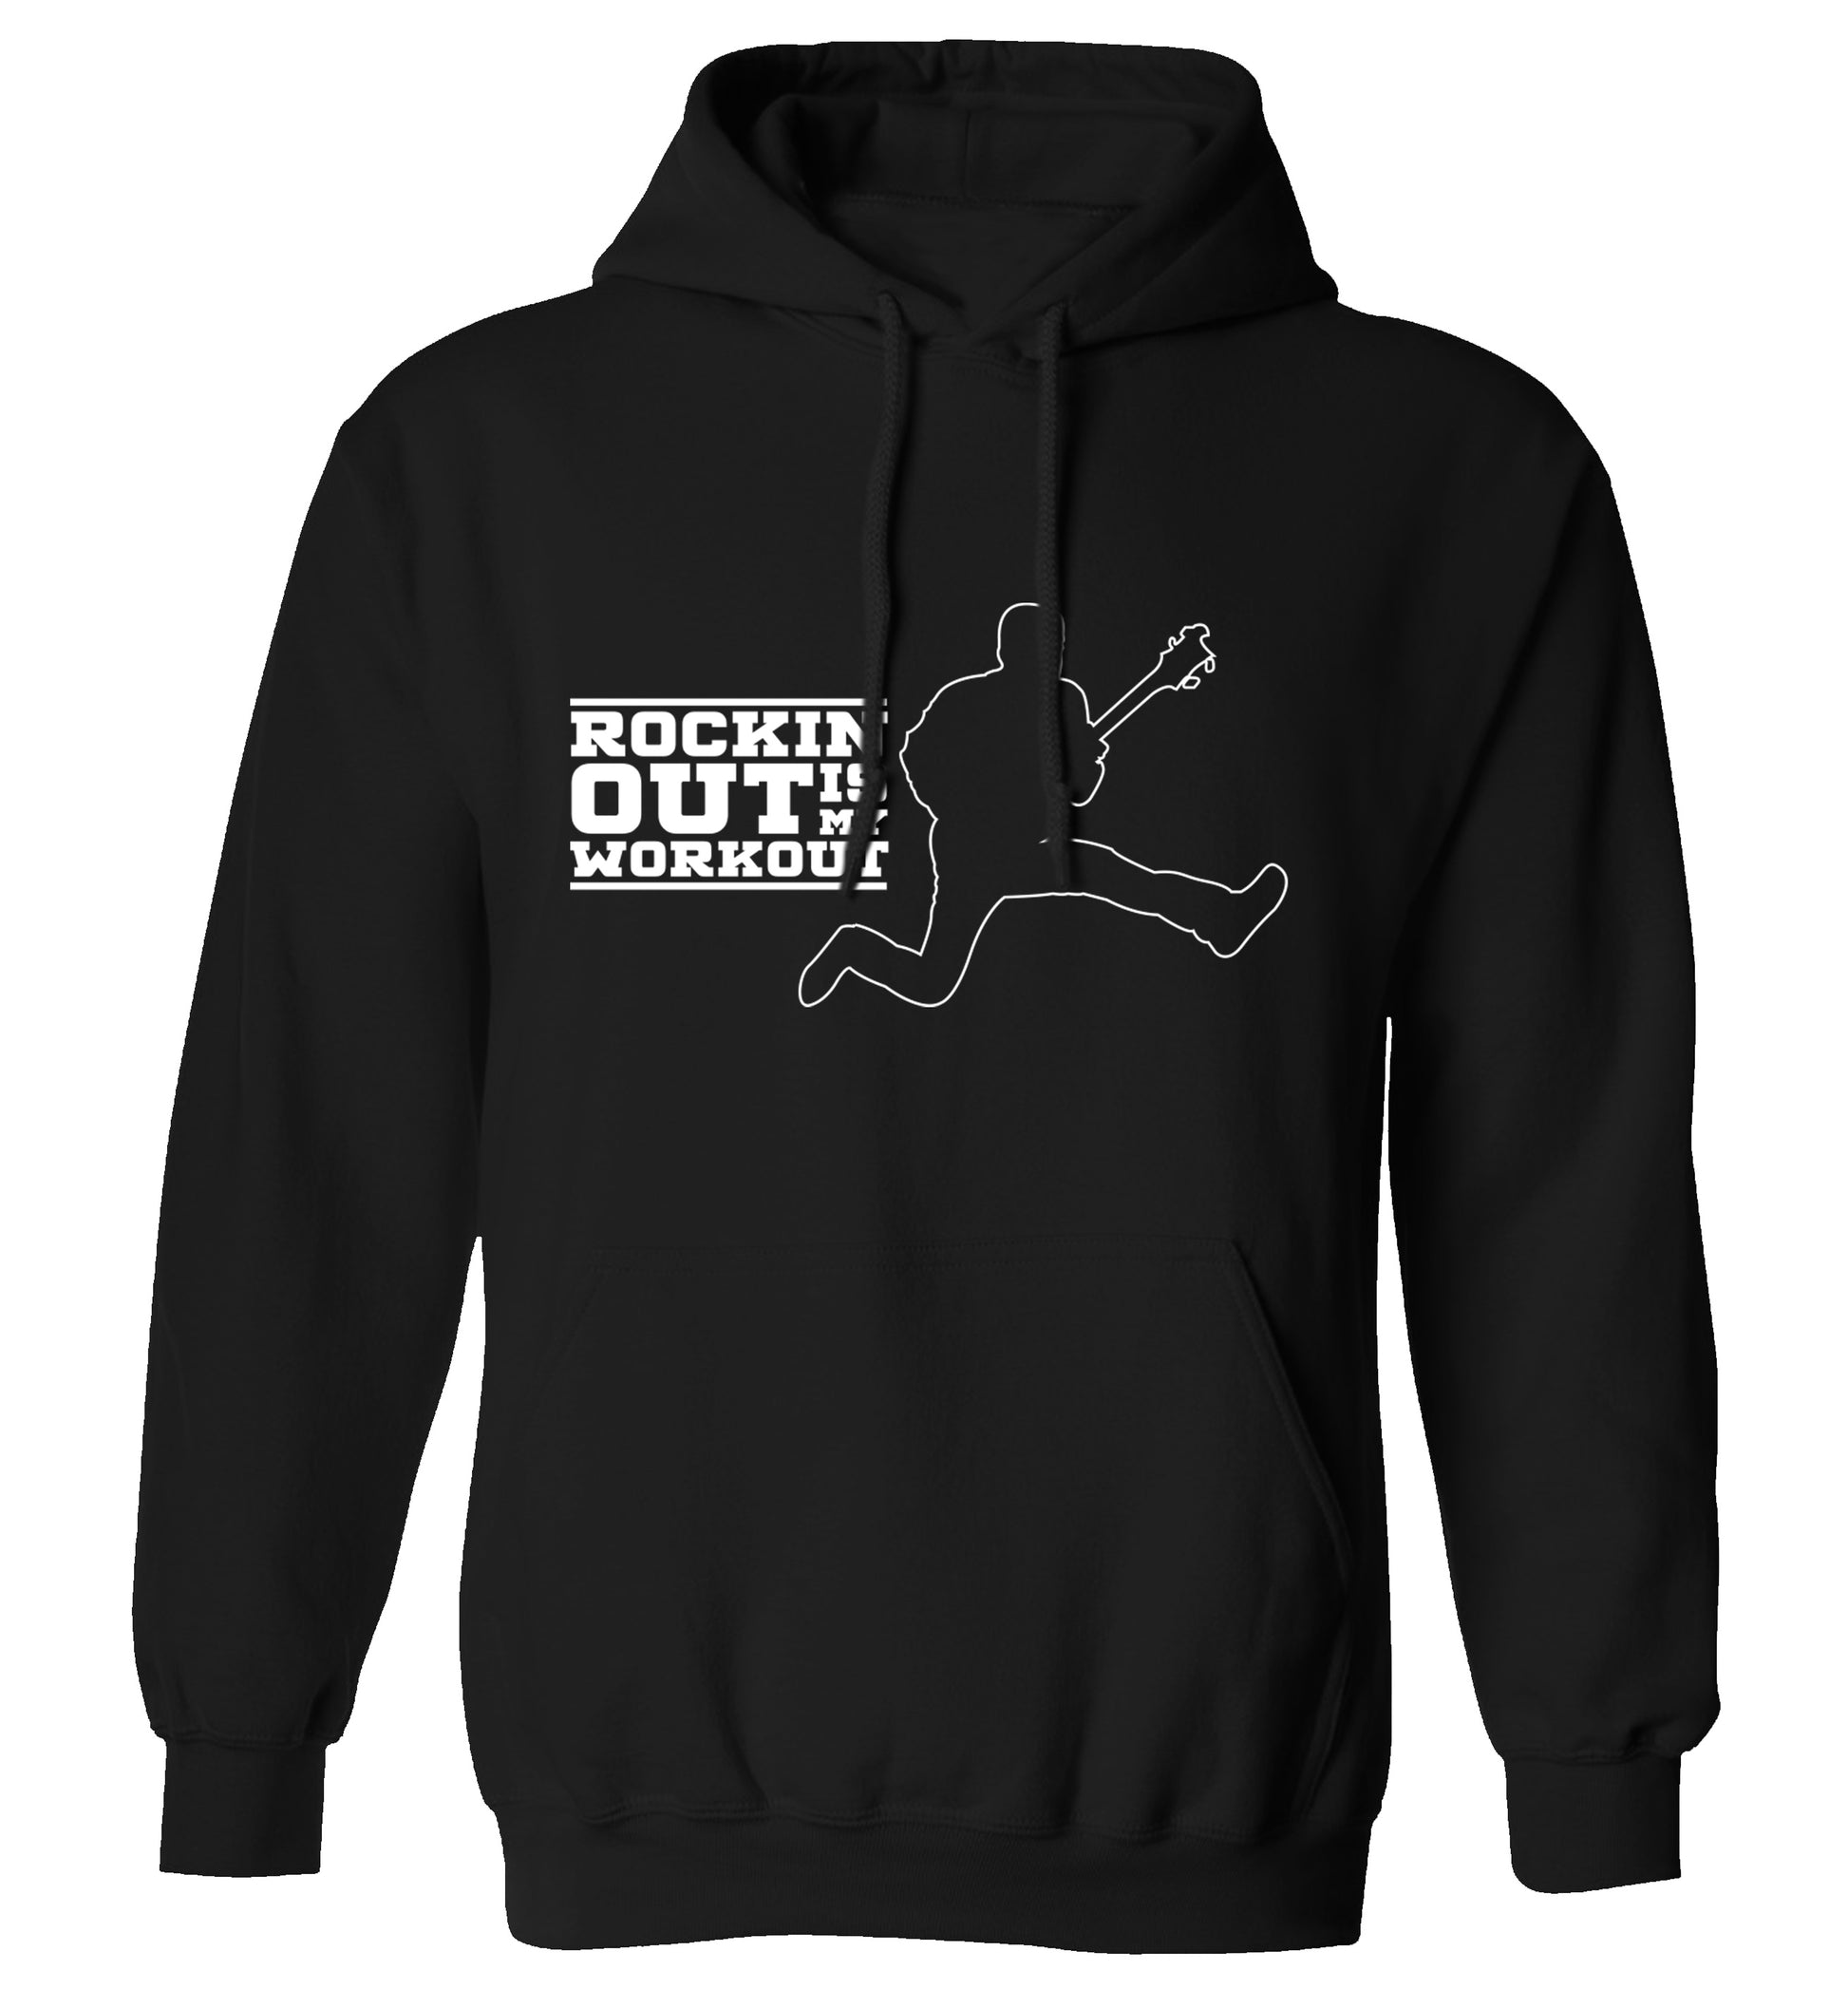 Rockin out is my workout adults unisex black hoodie 2XL